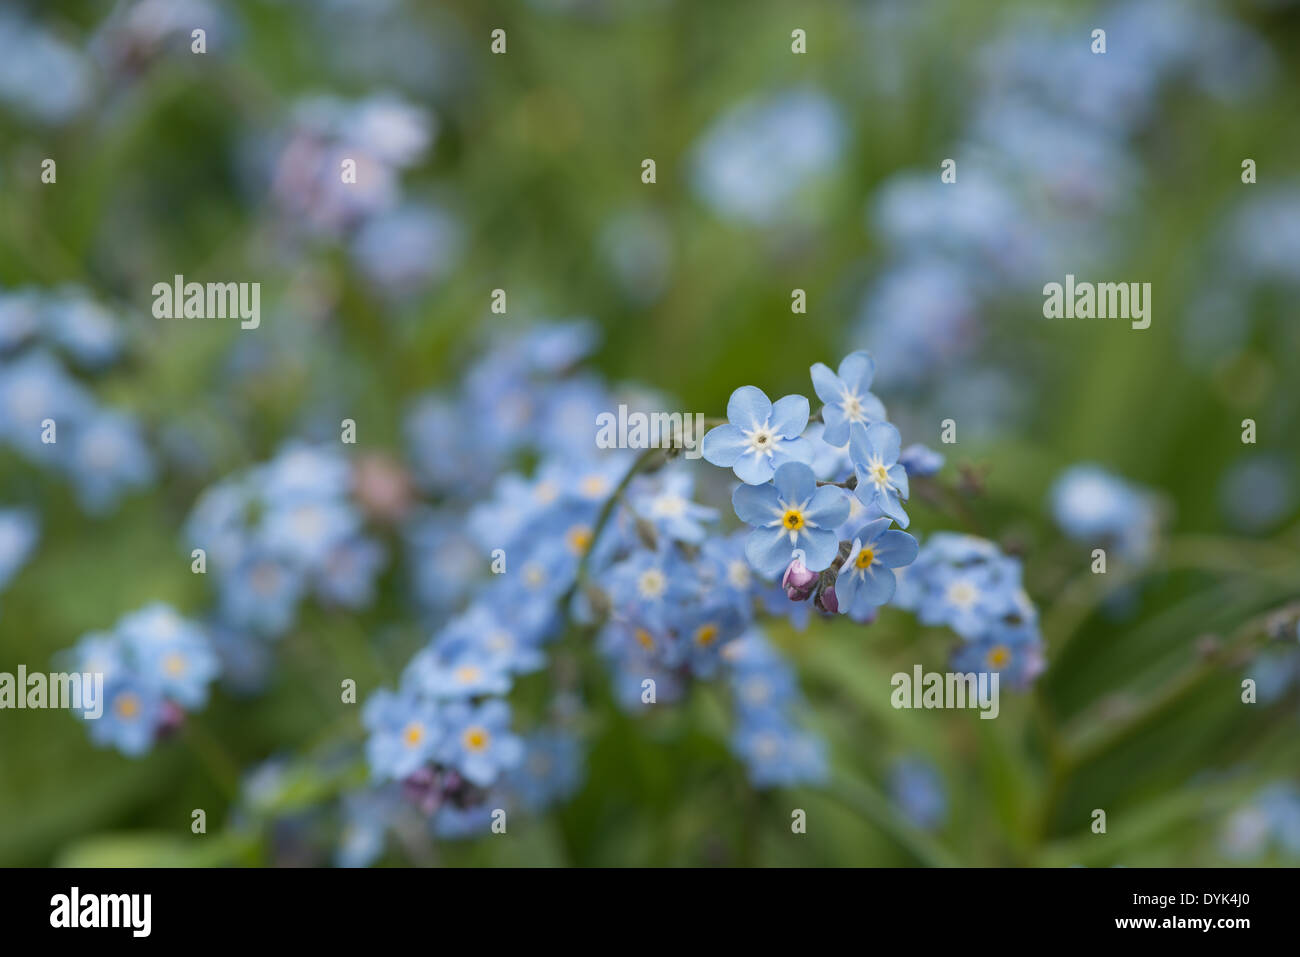 single bunch of blooms of forget-me-not flowers against a shallow depth of field background of out of focus Stock Photo